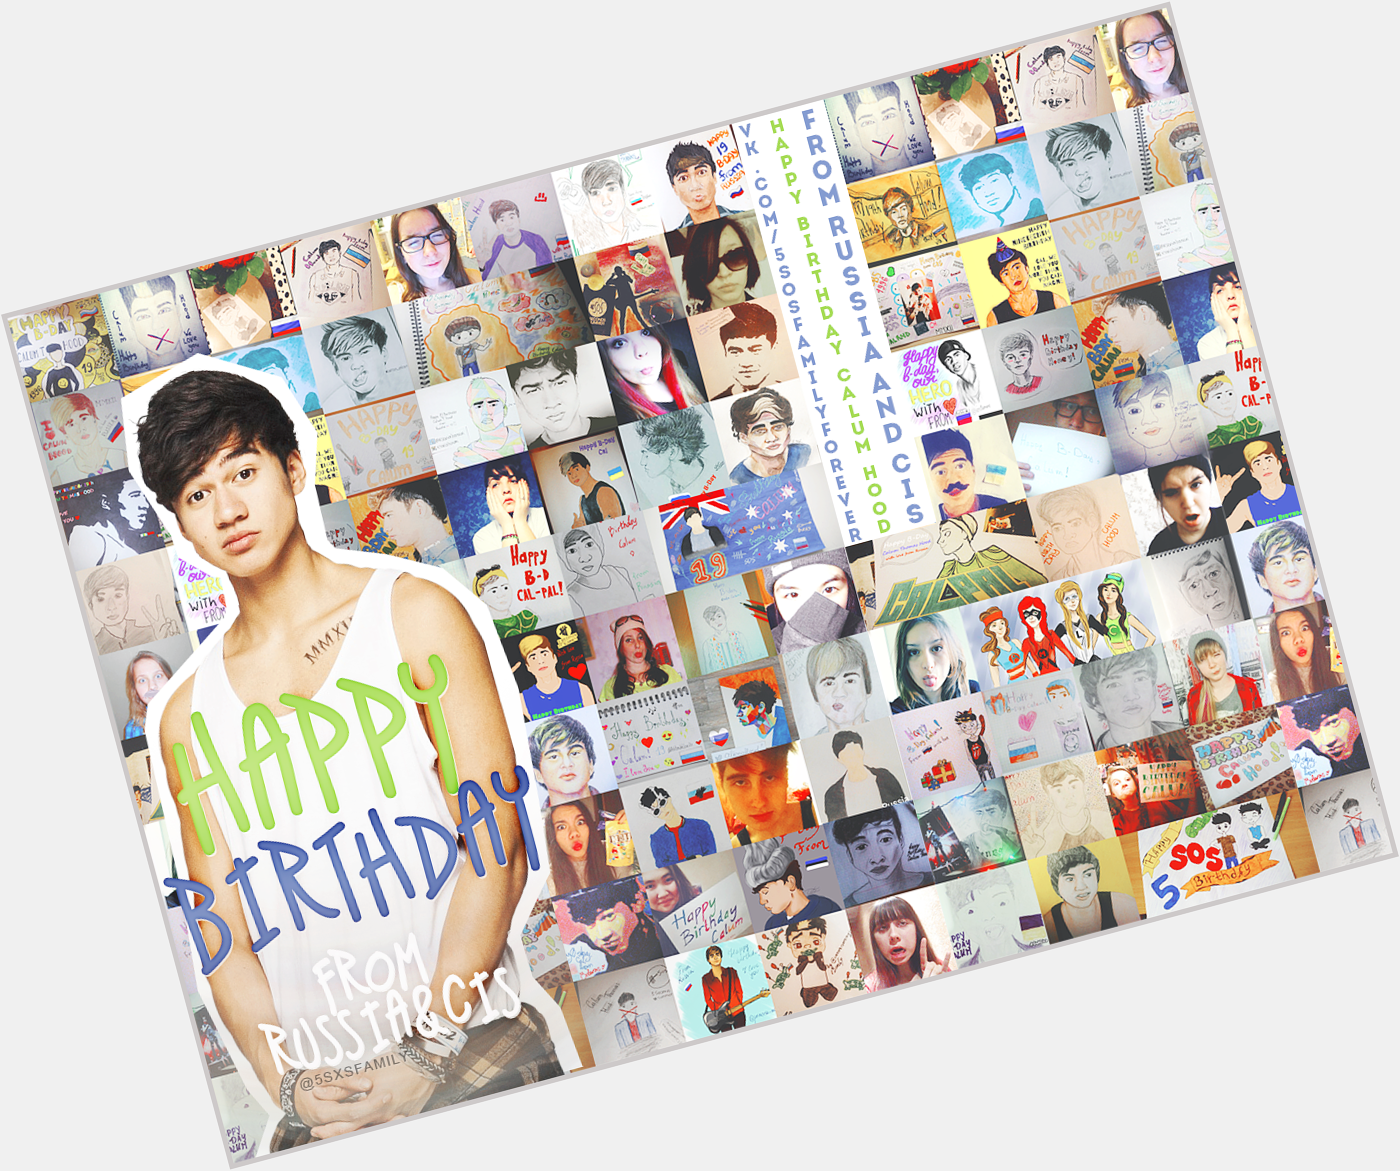 Calum Hood, I love you so much! Happy Birthday from Russia and CIS! x2 